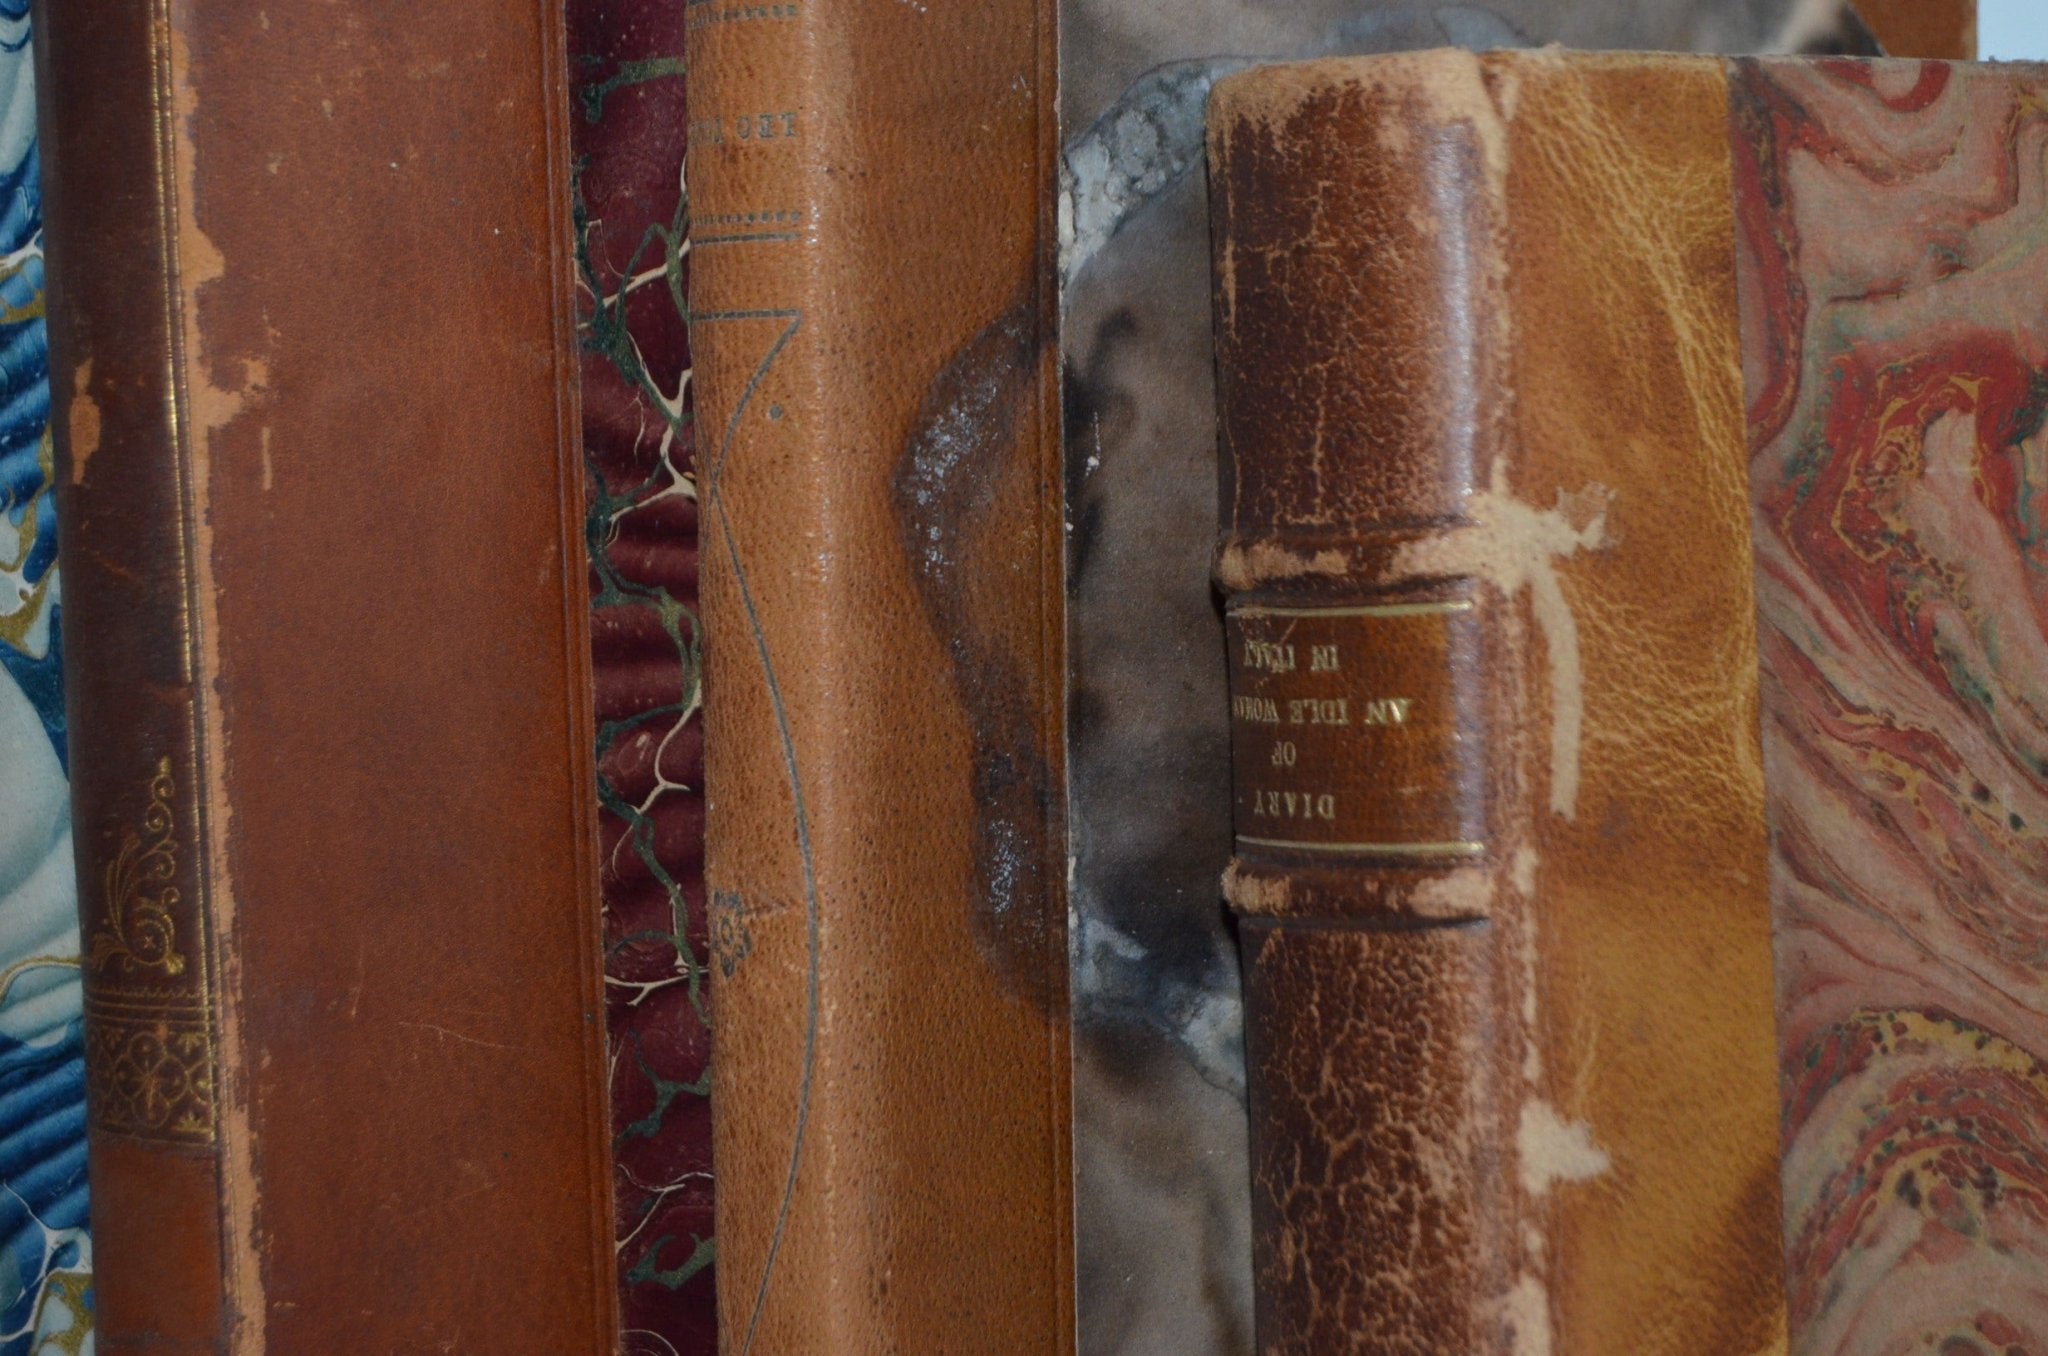 Antique Leather Bound Book Décor – Carmel Brown - Alfred Lord Tennyson - Brookfield Books